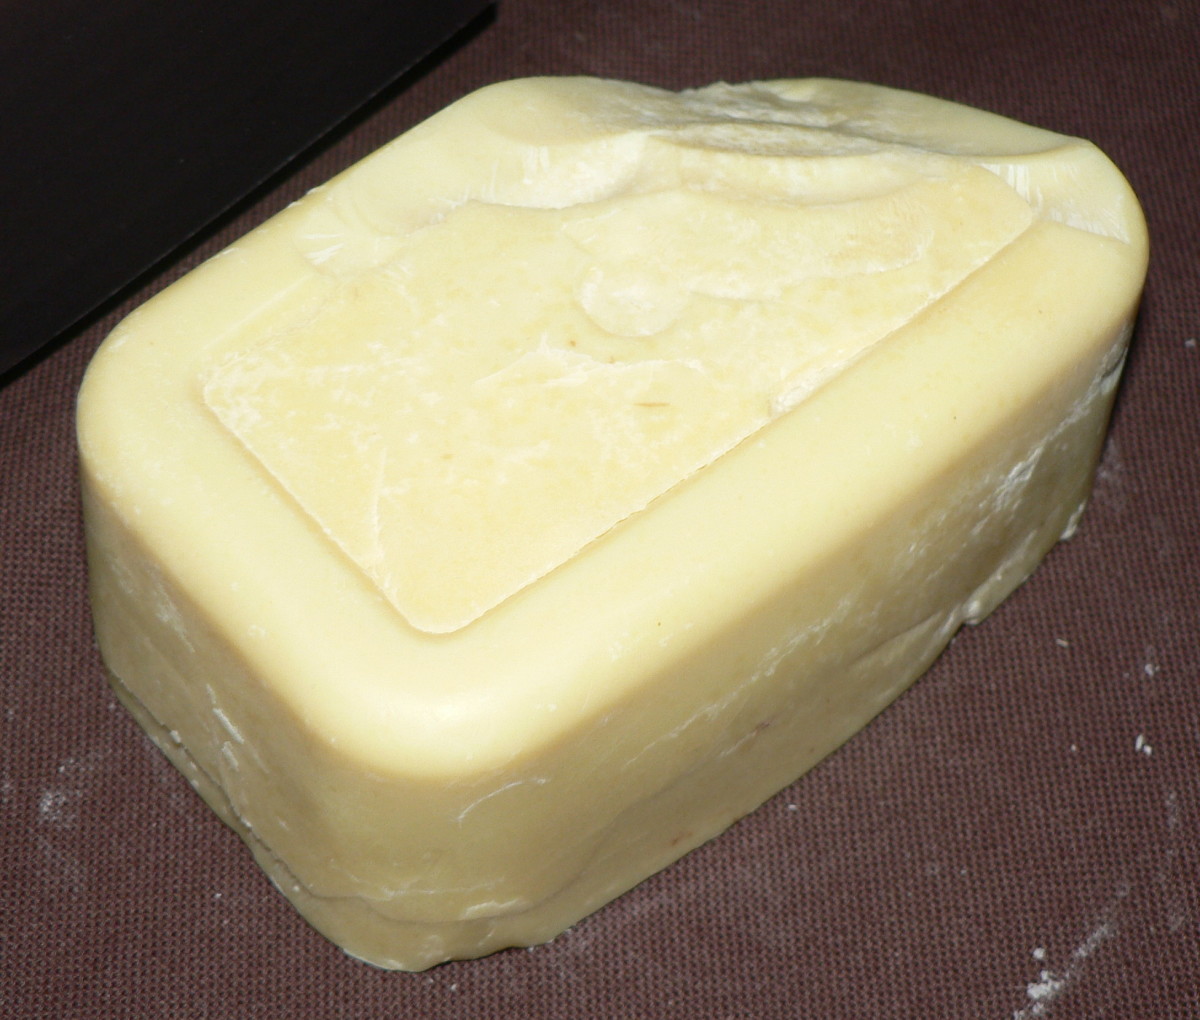 Cocoa butter is frequently recommended for pregnant women as a preventive in stretch marks.